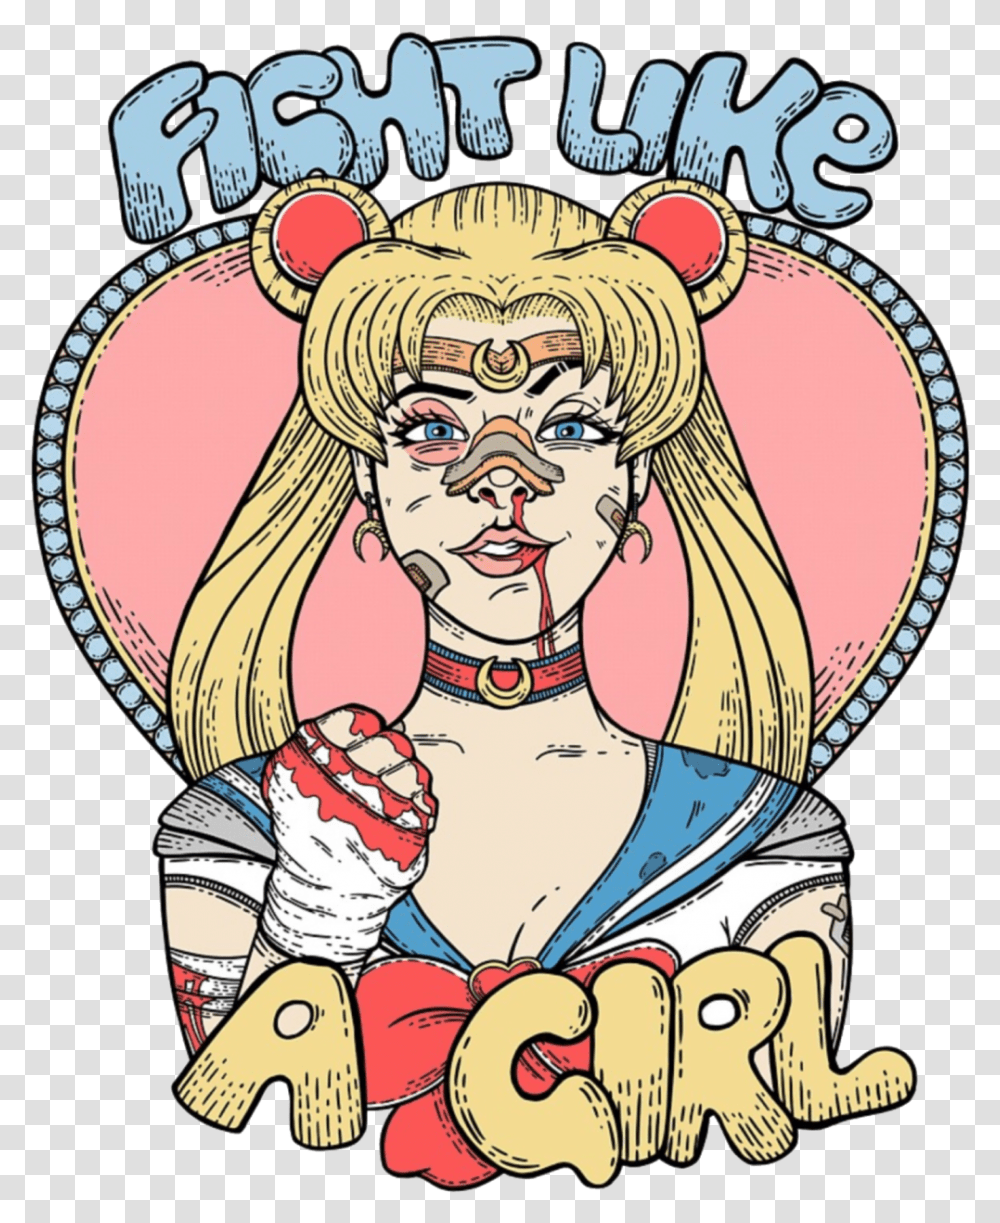 Girl Sailor Moon And Feminist Image Fight Like A Girl Sailor Moon, Comics, Book, Poster, Advertisement Transparent Png